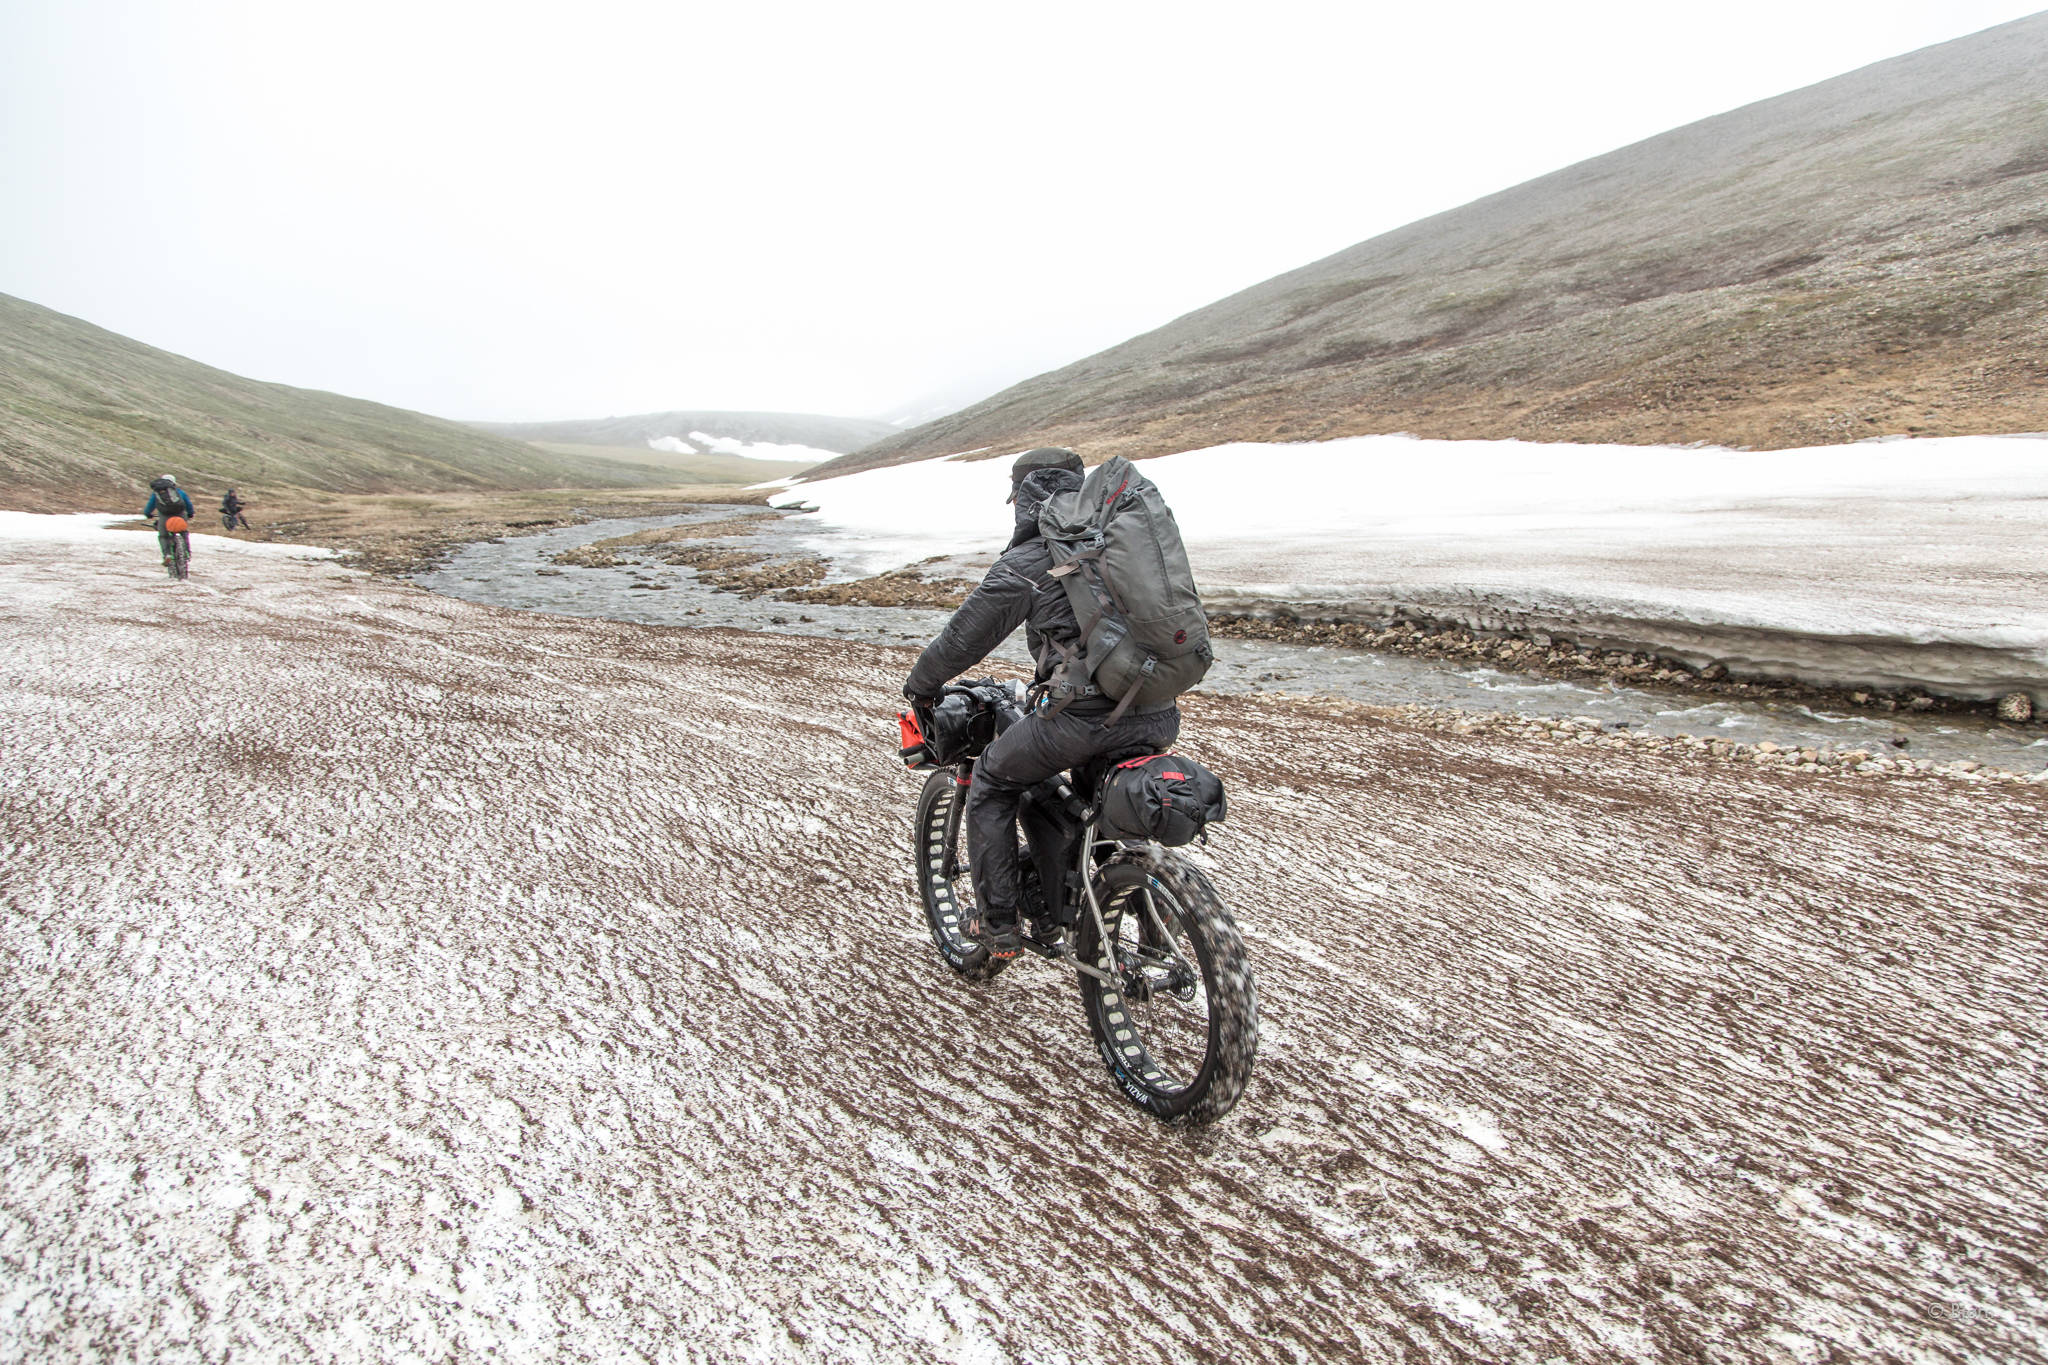 The group heads rides along snow in a creek valley. (Photo courtesy Bjørn Olson)